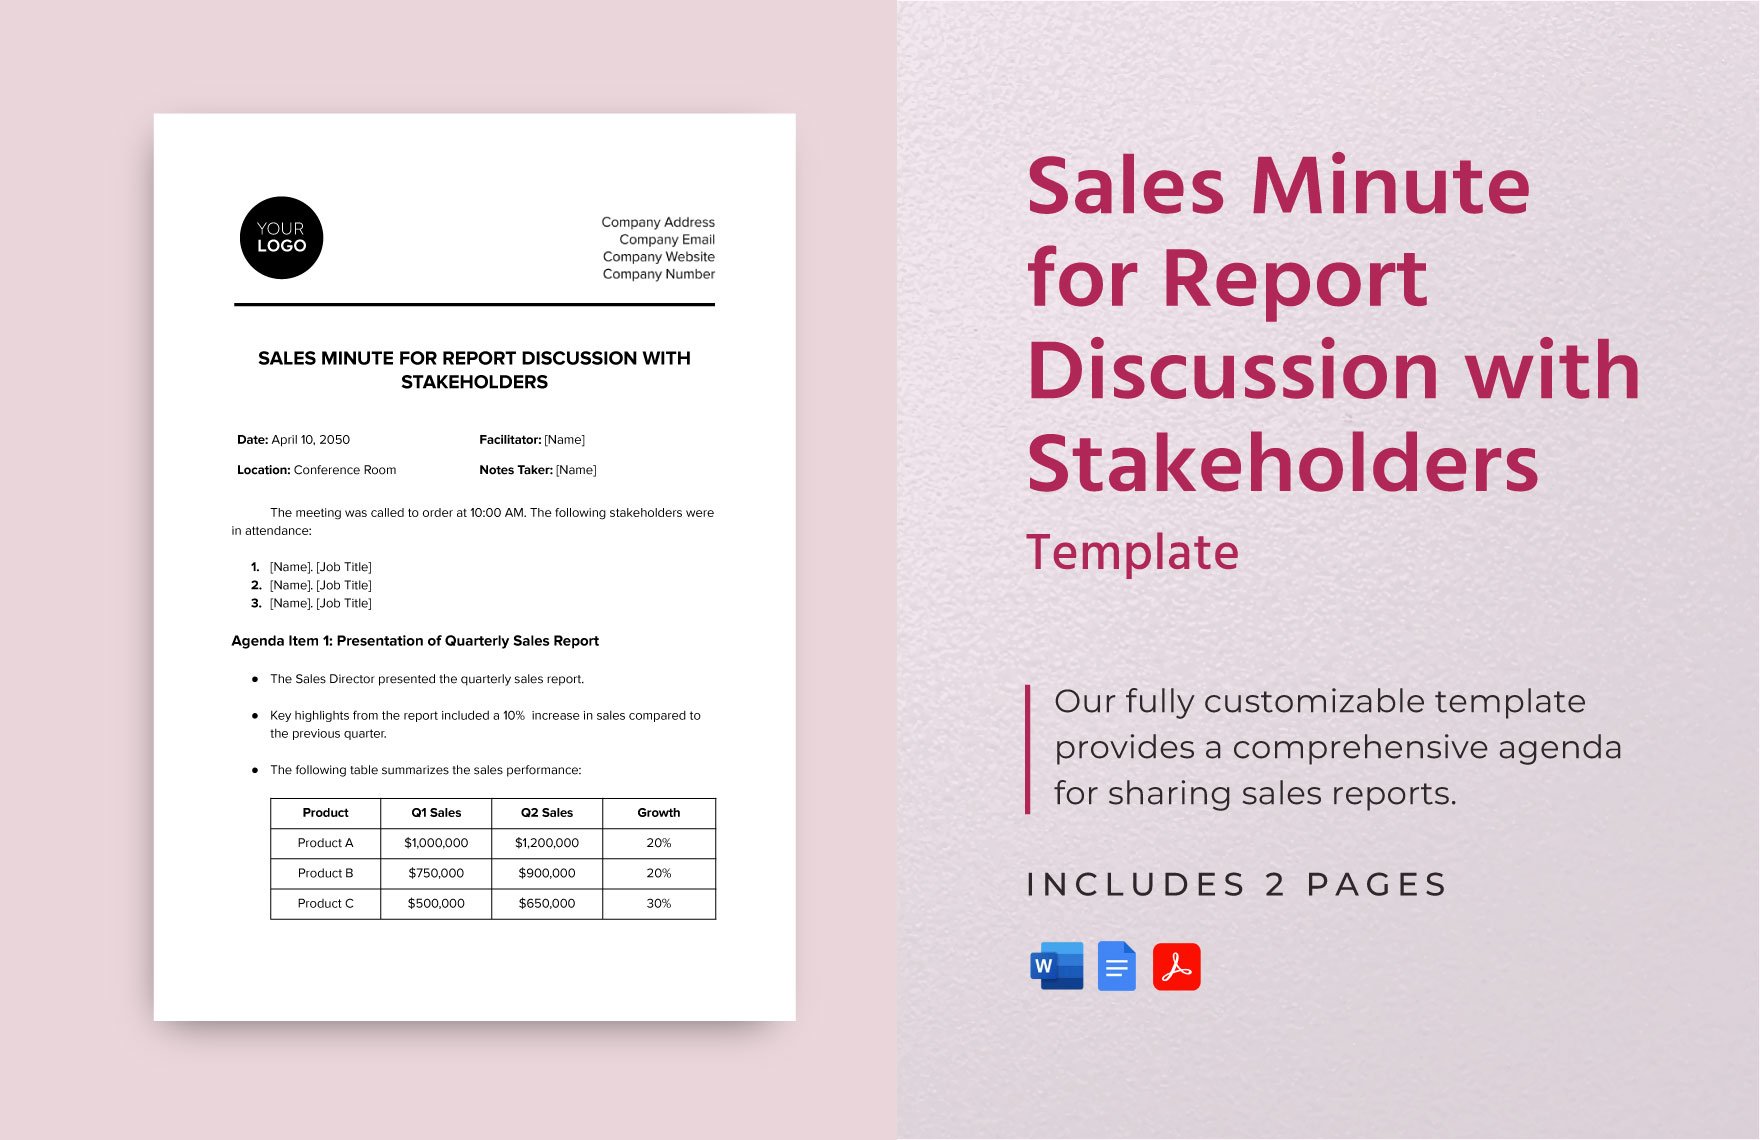 Sales Minute for Report Discussion with Stakeholders Template in Word, Google Docs, PDF